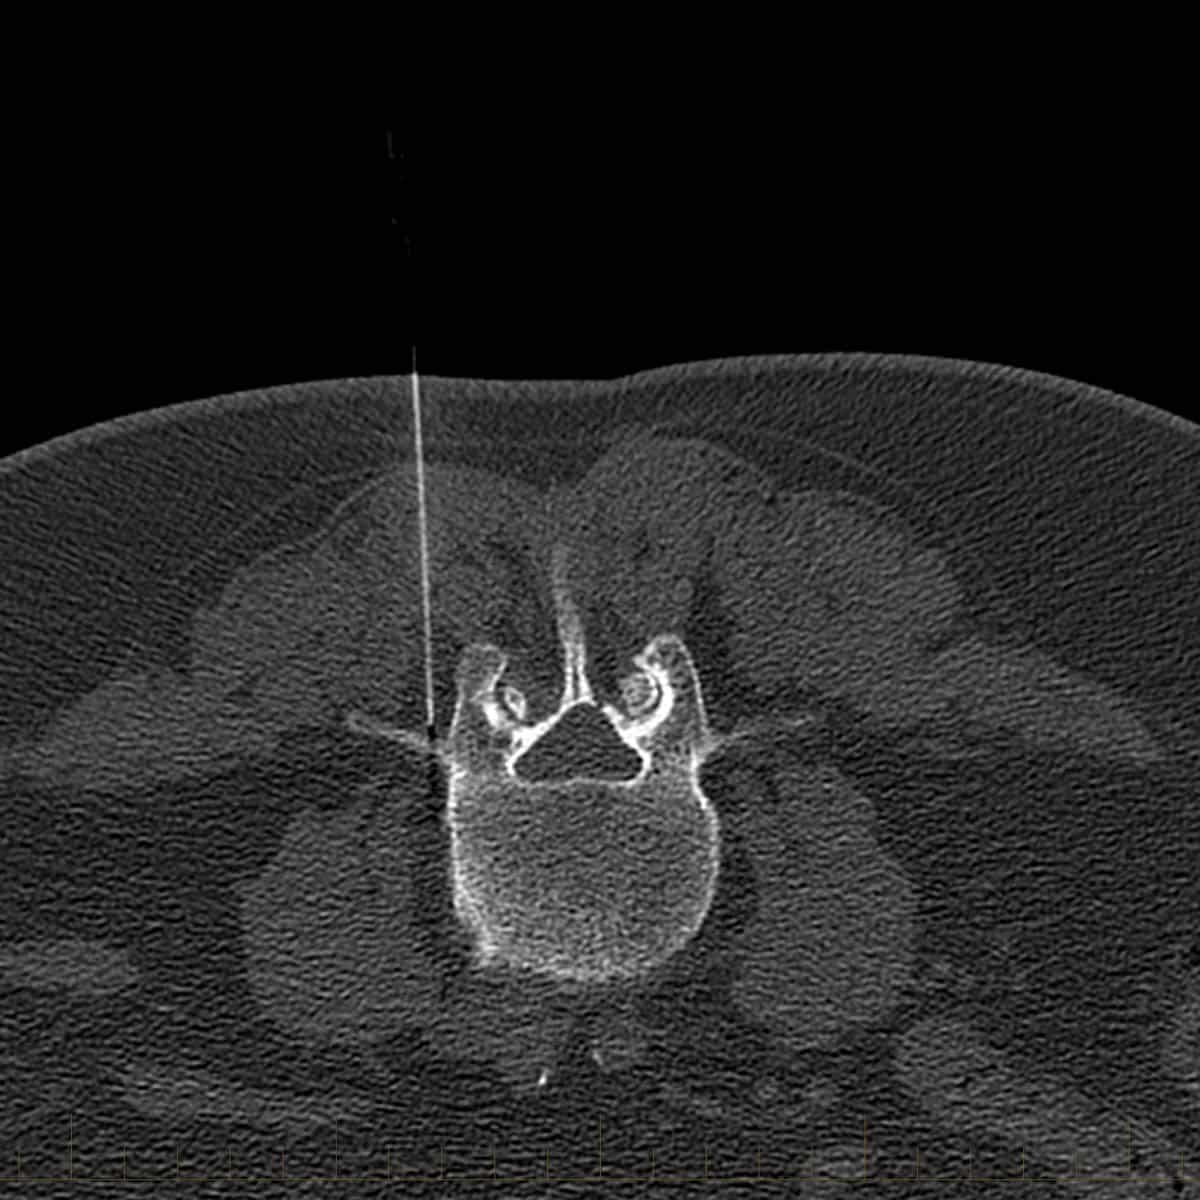 Medial branch block (MBB) - CT image guided spinal injection for pain management